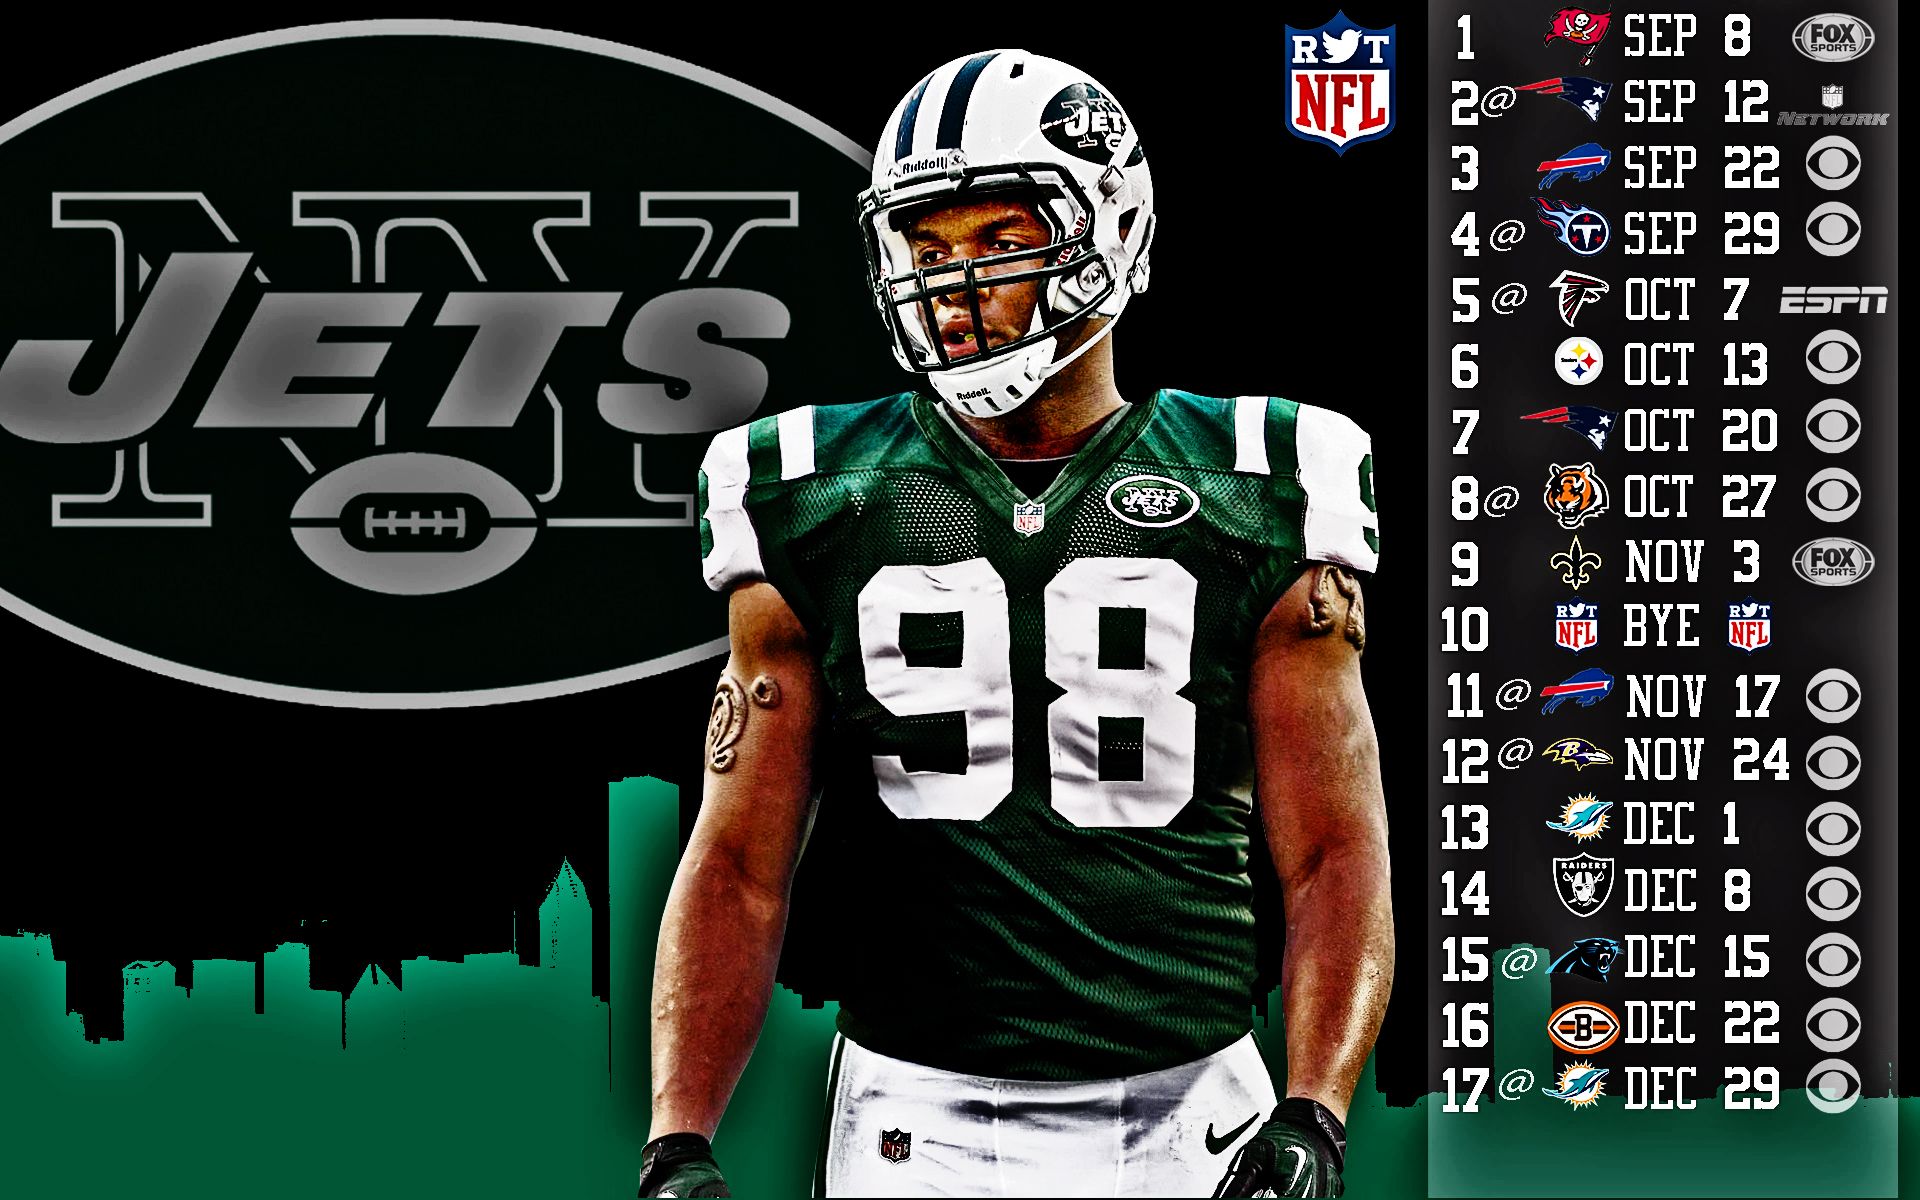 Gallery for - jets wallpaper 2013